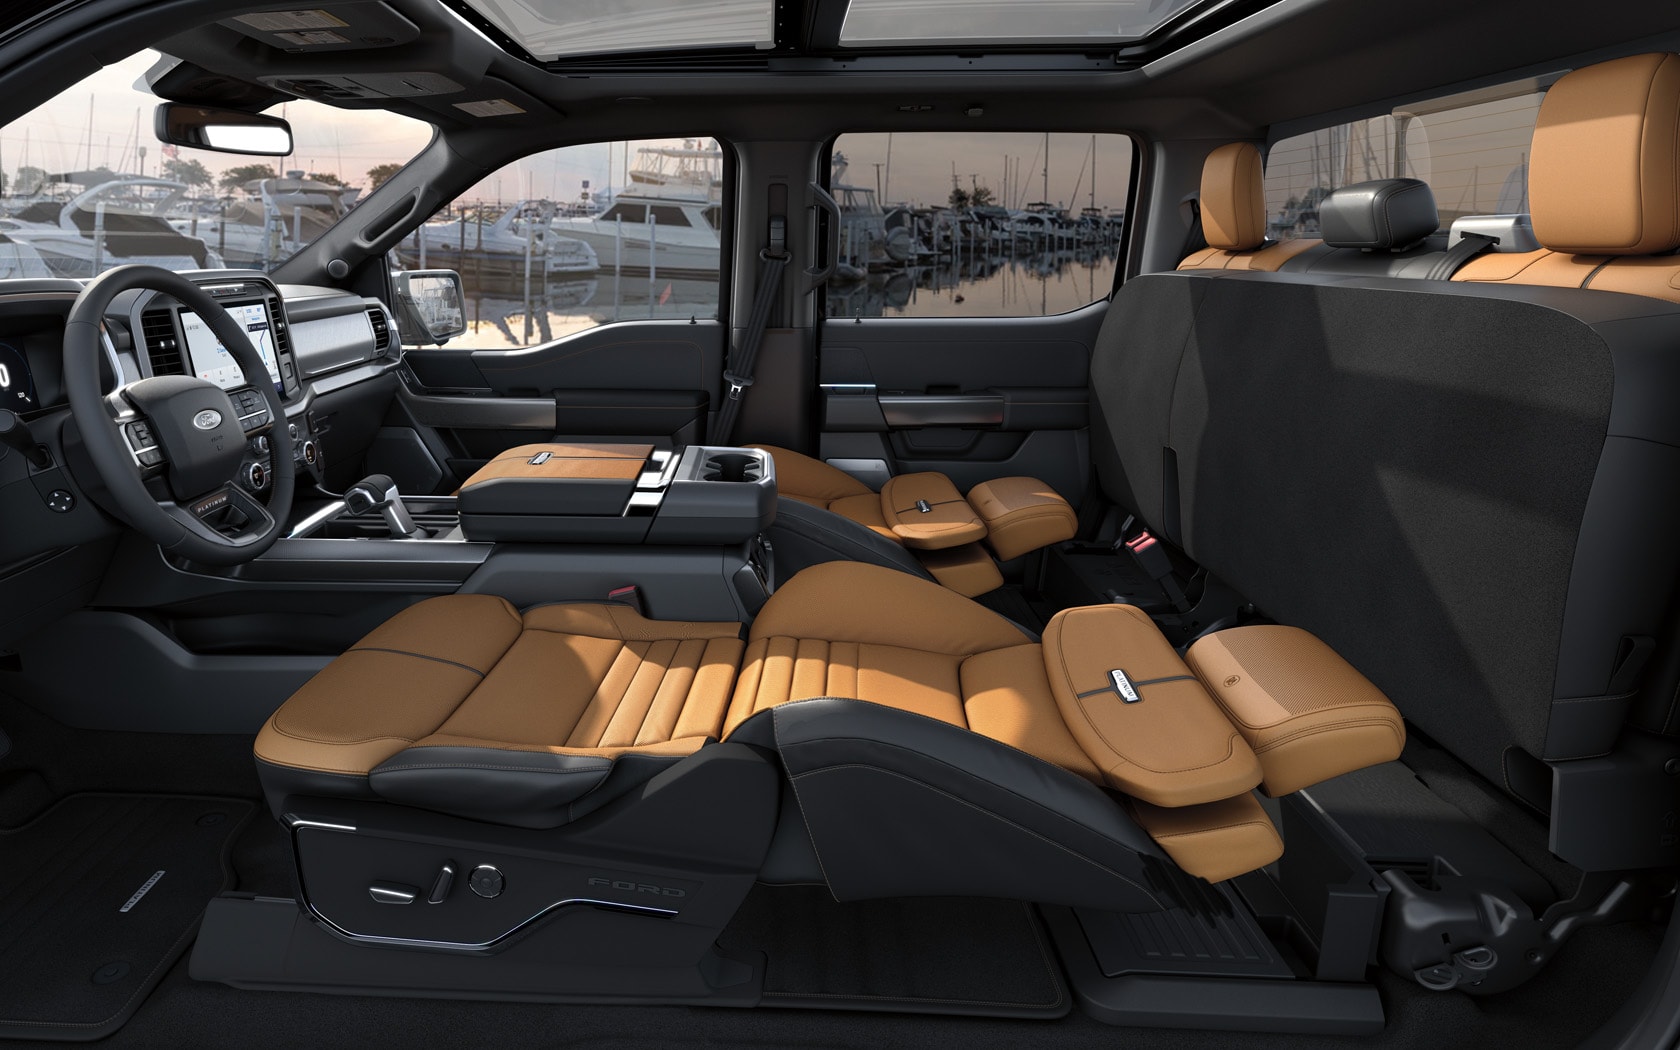 https://s1.cdn.autoevolution.com/images/news/fords-new-seats-allow-owners-to-take-a-comfortable-nap-in-their-trucks-151625_1.jpg